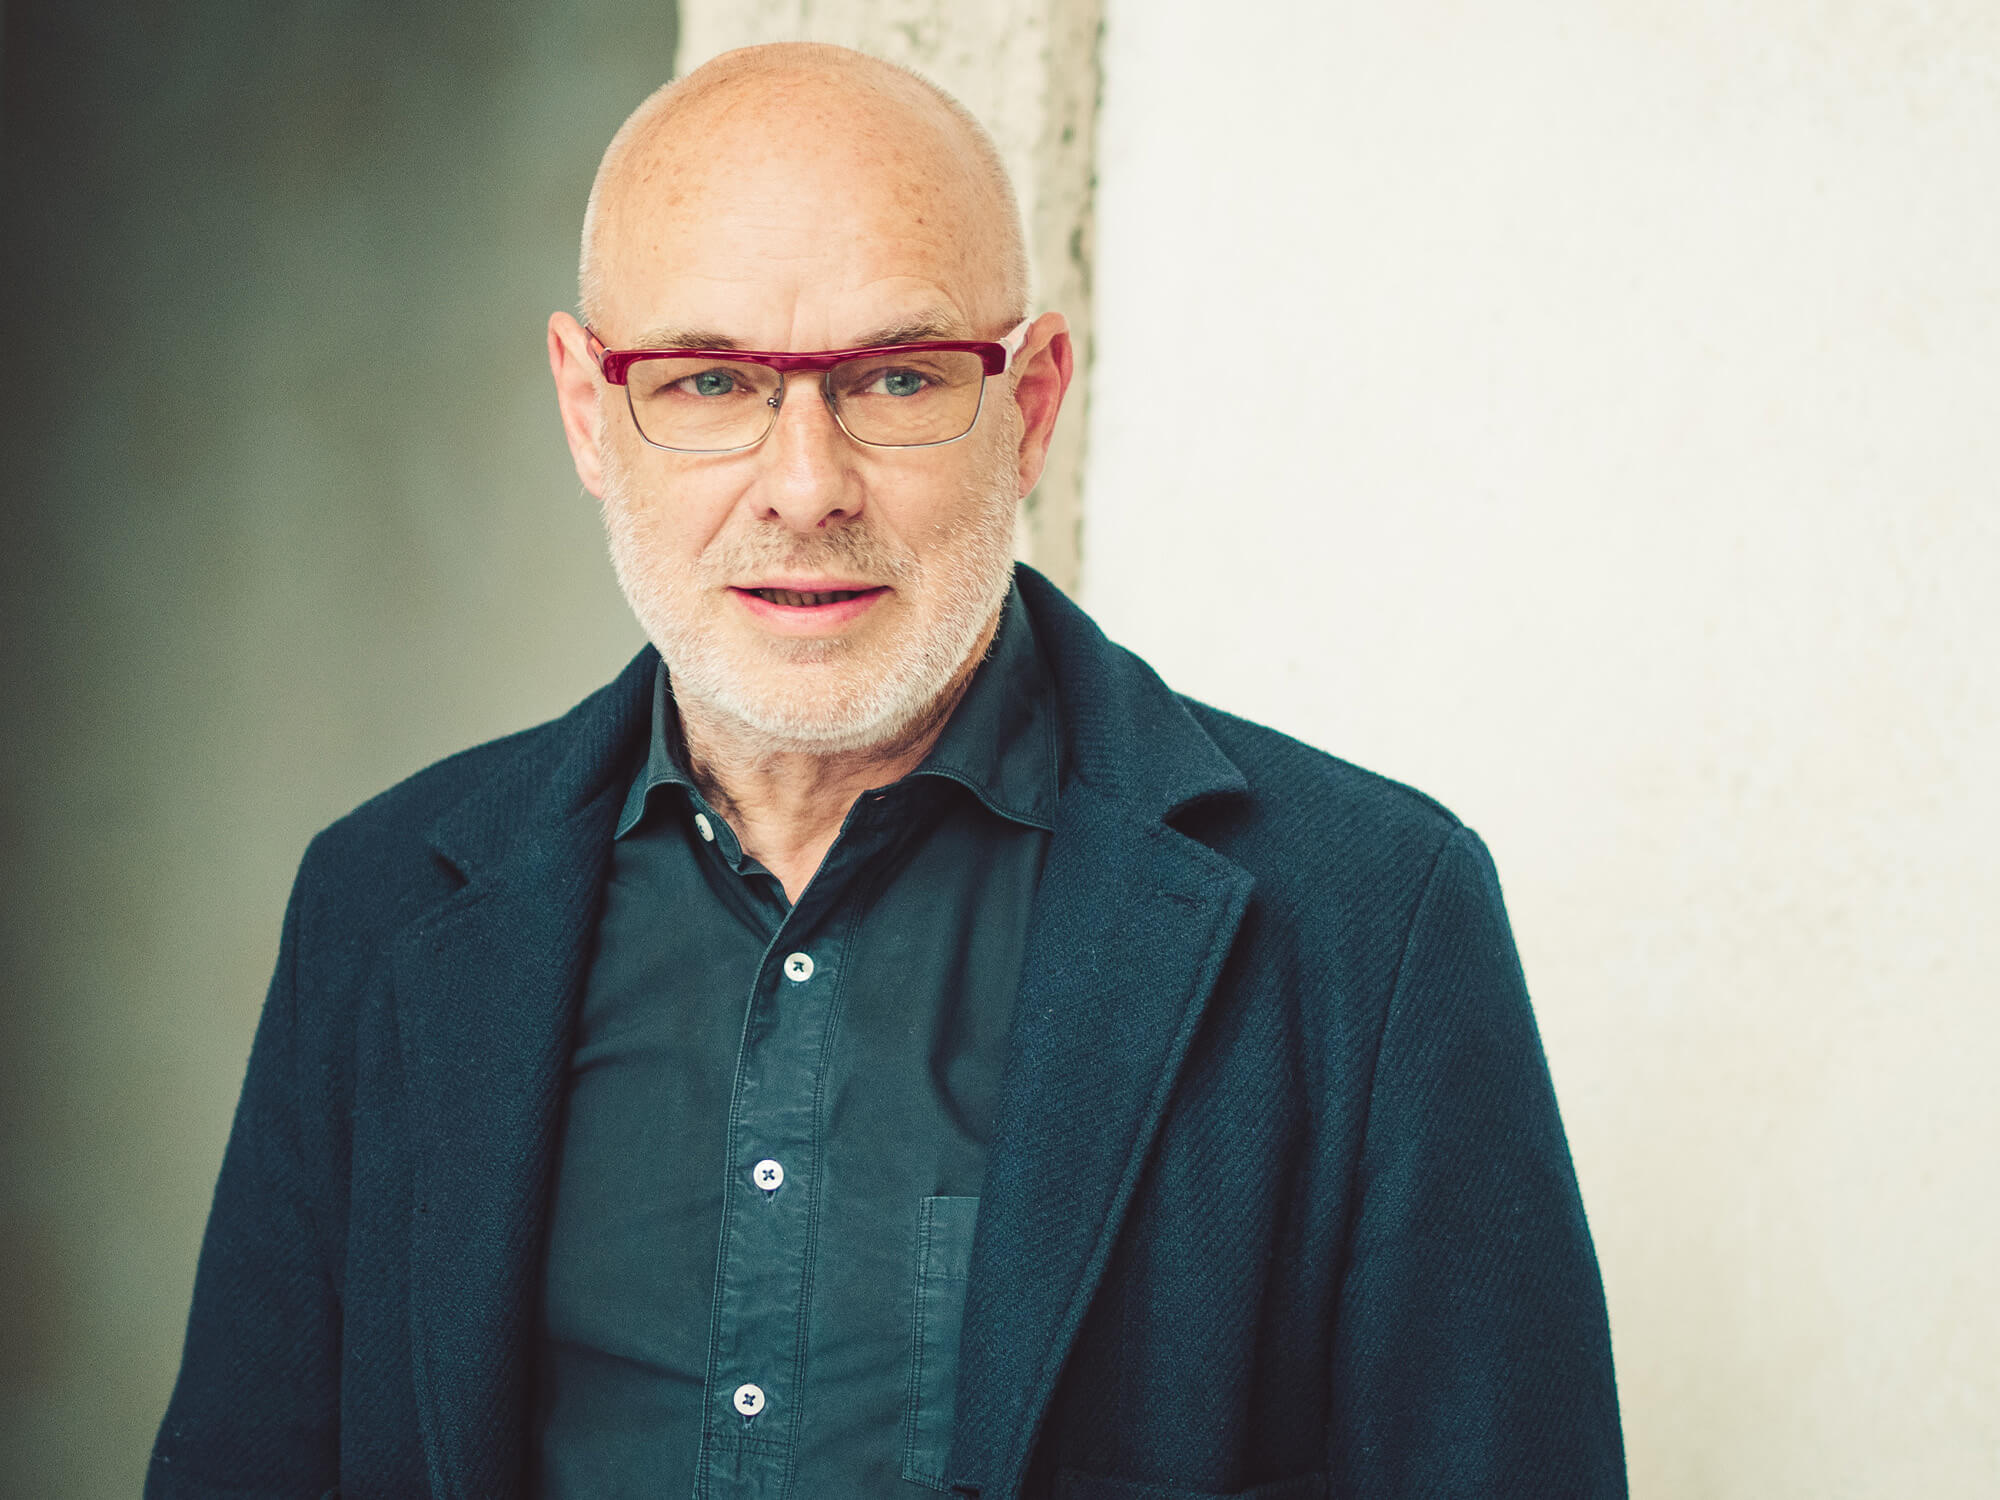 Brian Eno looking off to the right, with his mouth slightly open as if he is speaking. He wears red-framed glasses and a navy shirt and jacket.